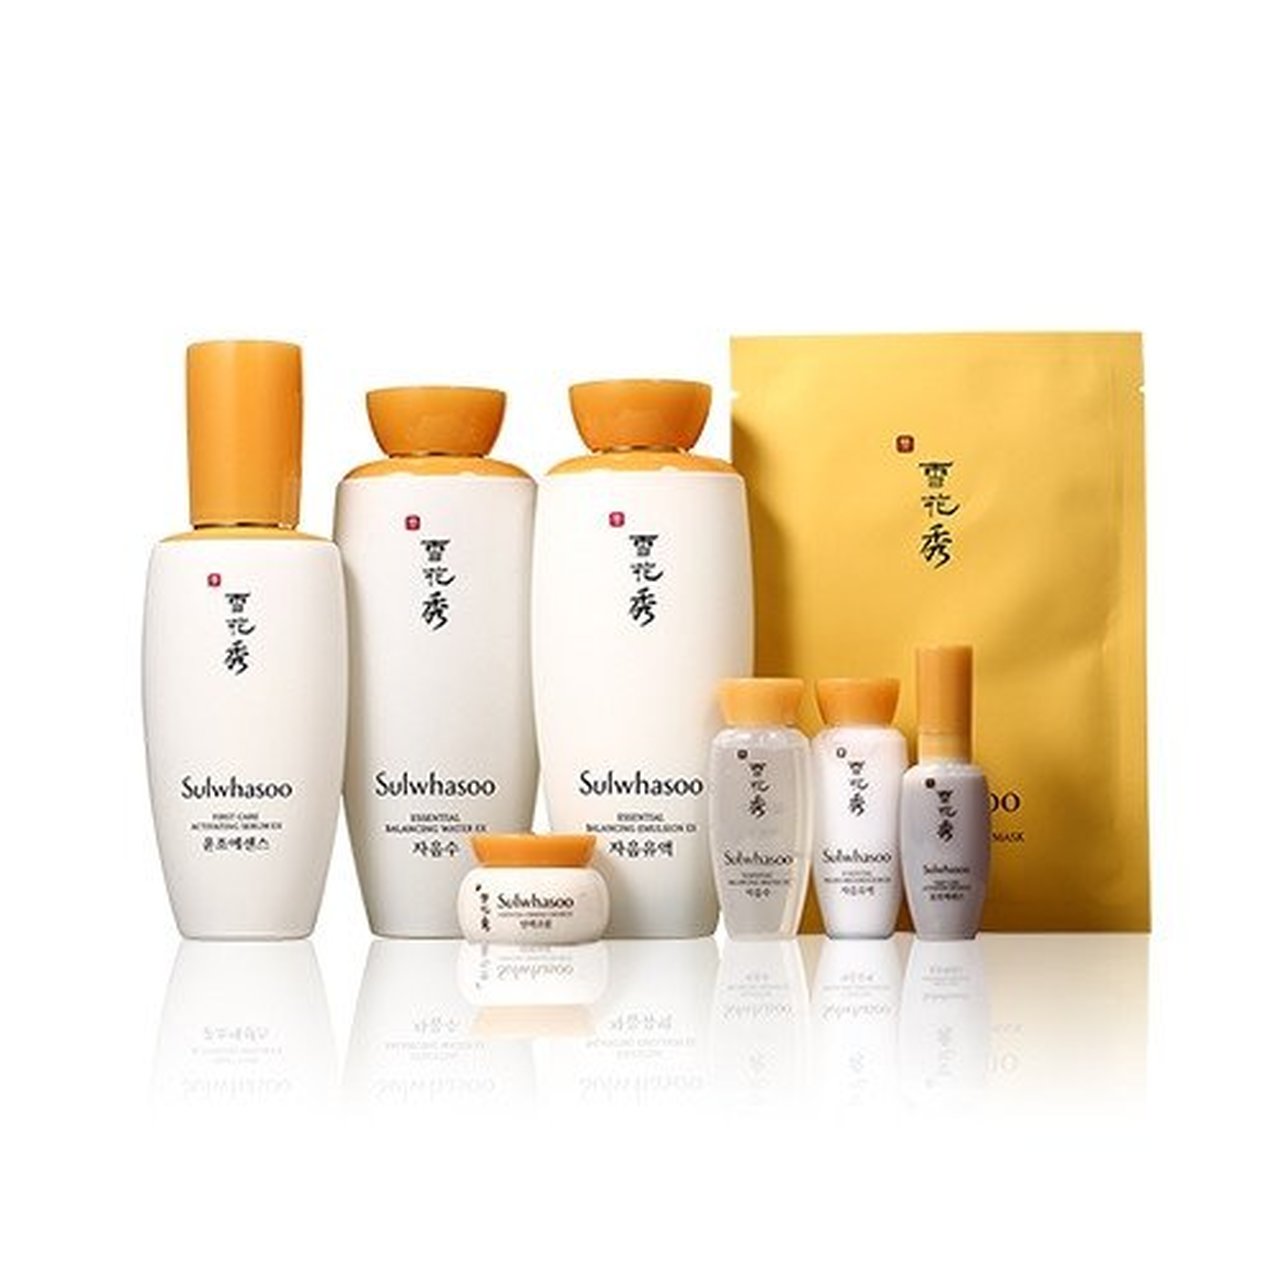 Sulwhasoo First Care Essential Set (8 items)